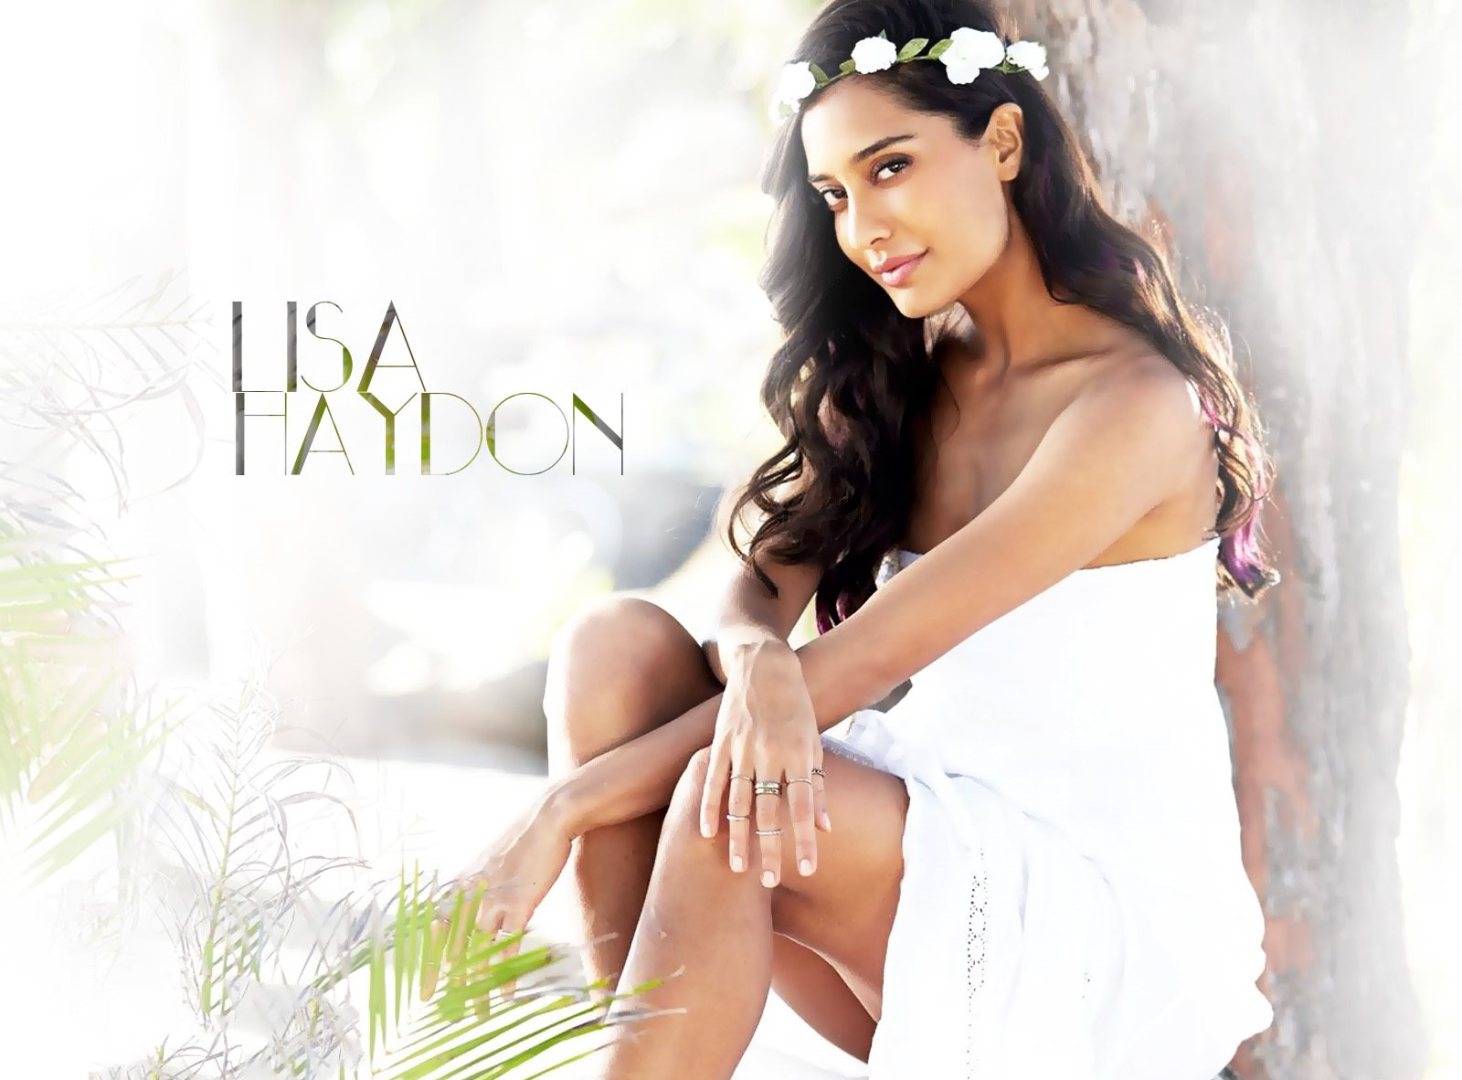 Lisa Haydon Hot Stylish Images And Photoshoot Collections - Cinejolly